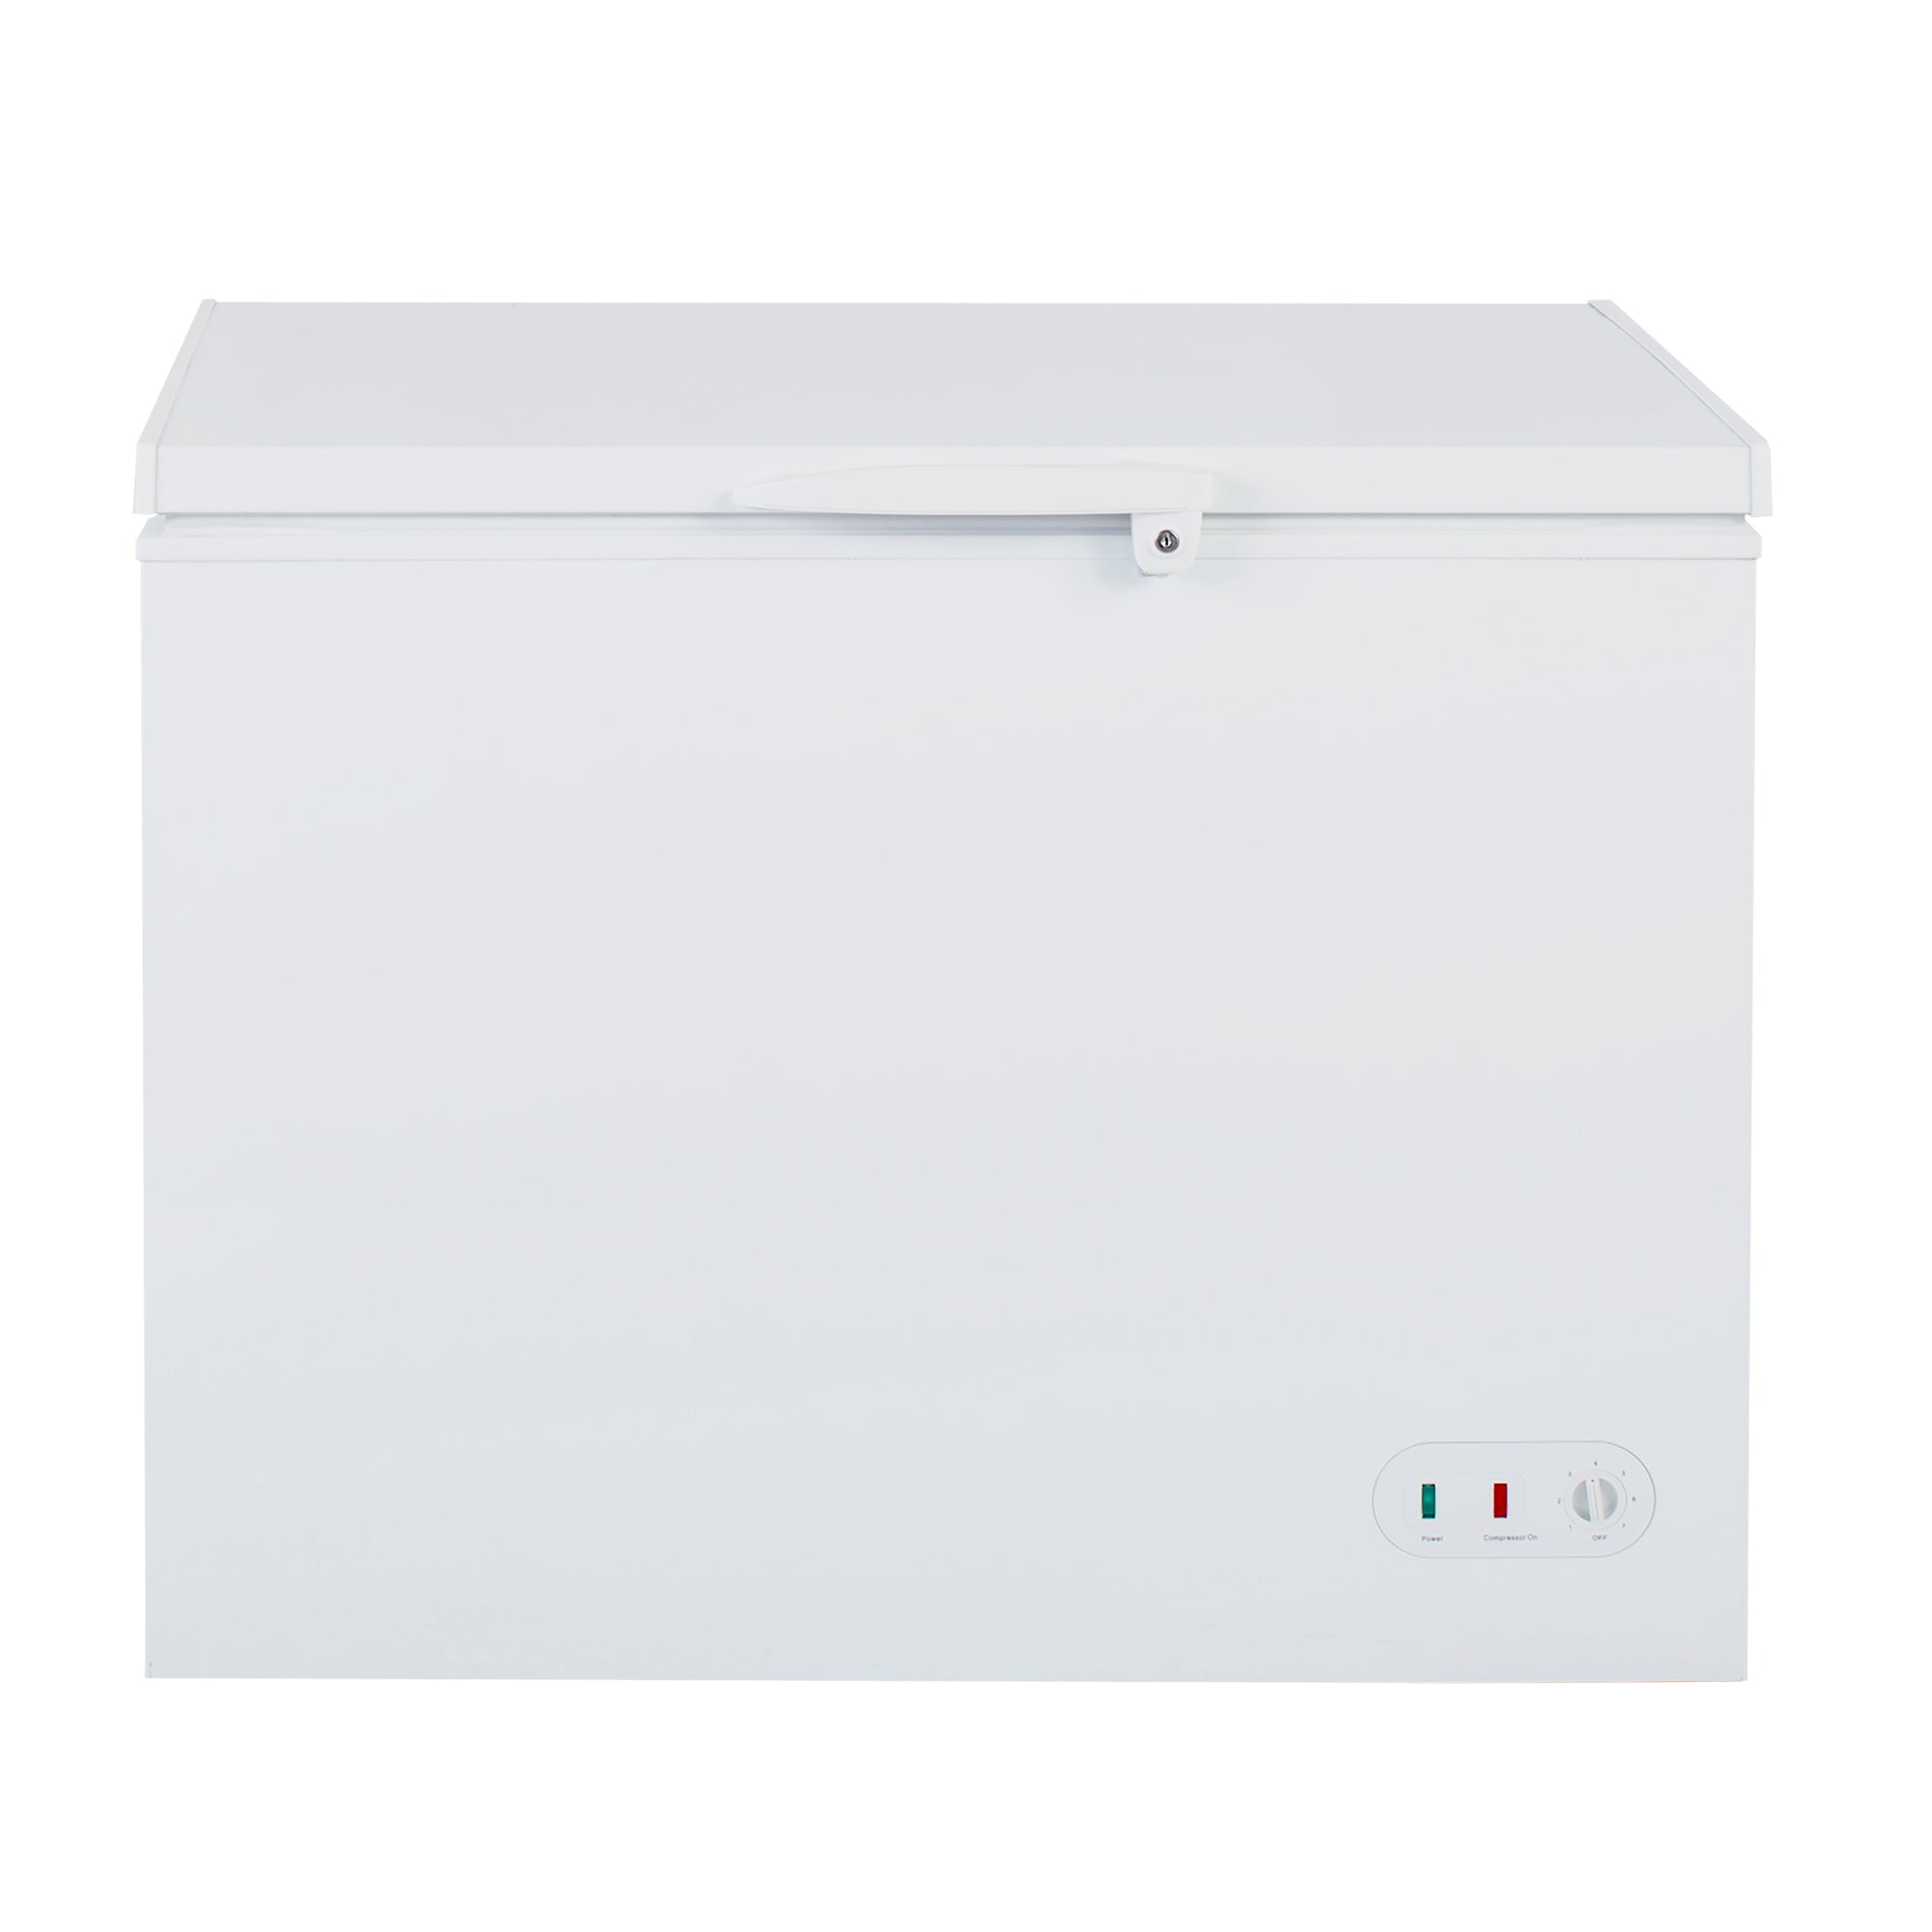 Maxx Cold - MXSH9.6SHC, Maxx Cold Chest Freezer with Solid Top, 40.6"W, 49.6 cu. ft. Storage Capacity, Locking Lid, Garage Ready, in White